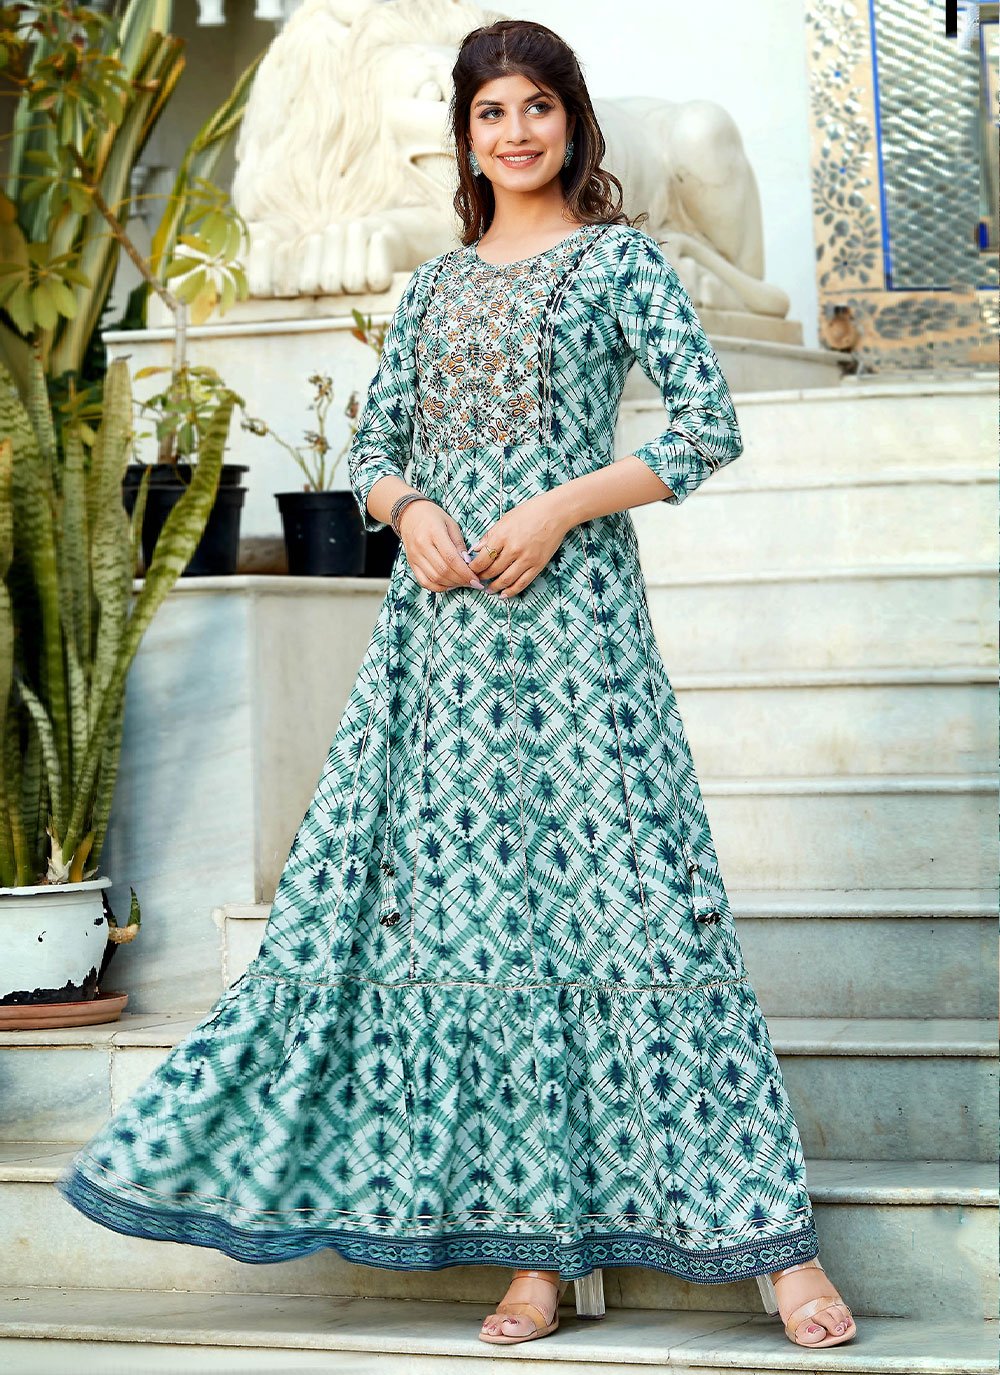 Gown Rayon Green Embroidered Gown